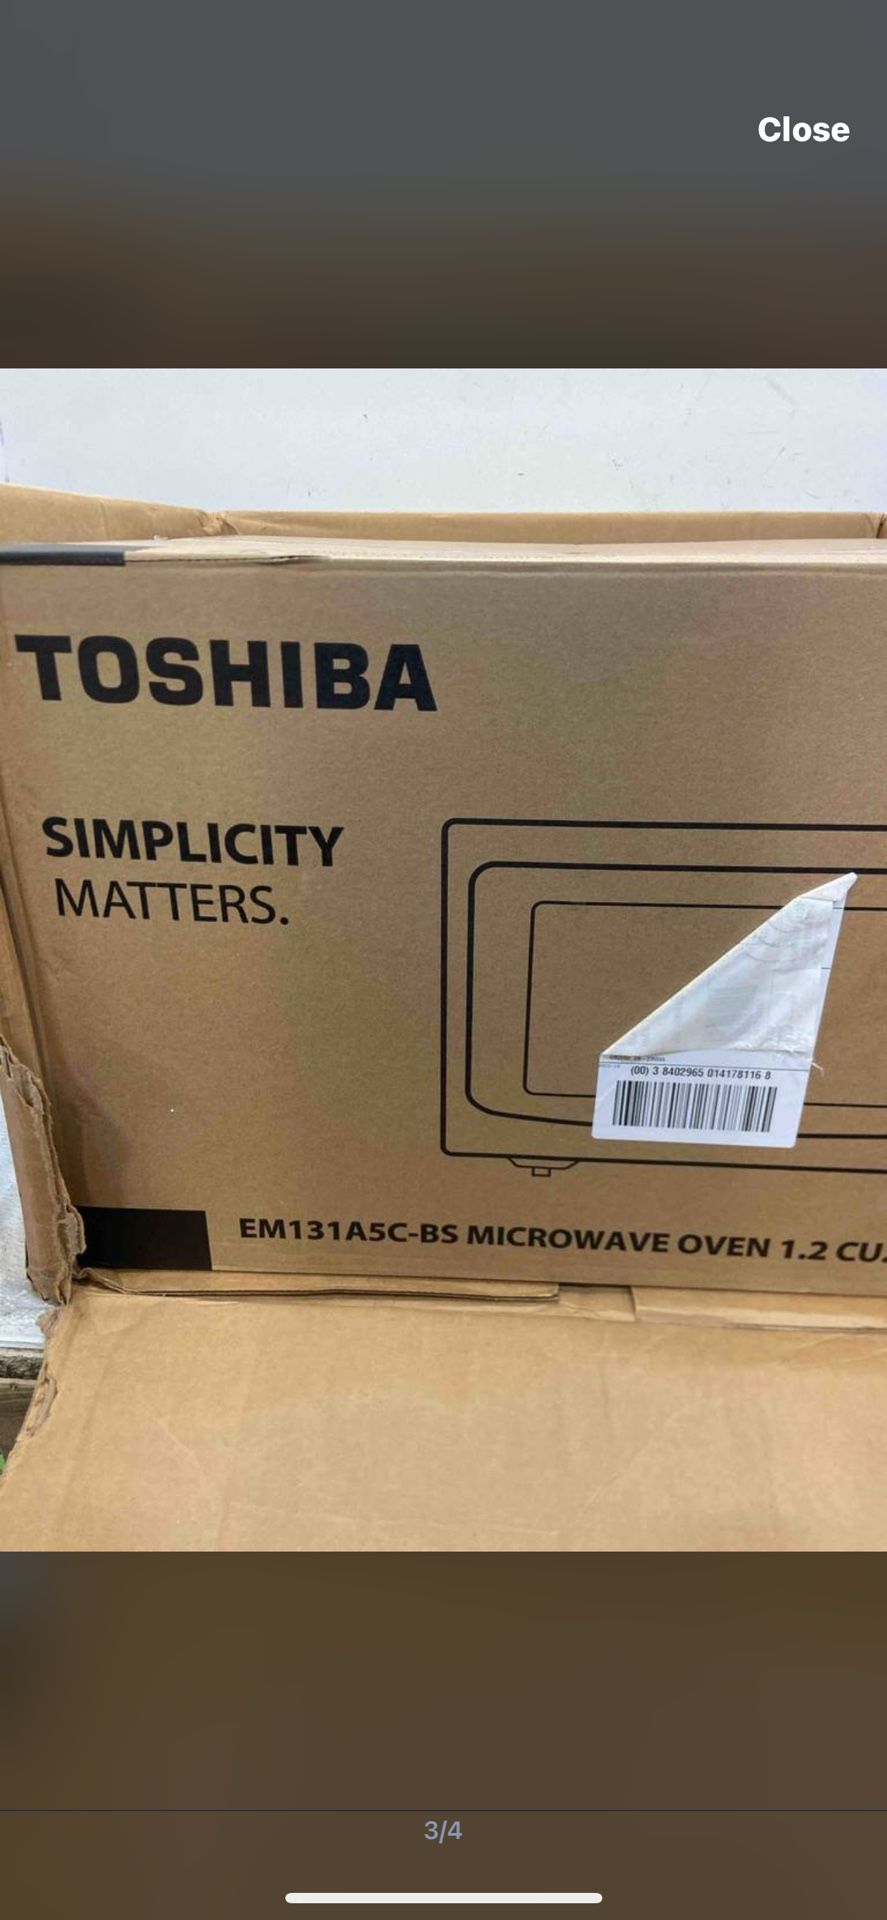 TOSHIBA EM131A5C-SS Countertop Microwave Ovens 1.2 Cube